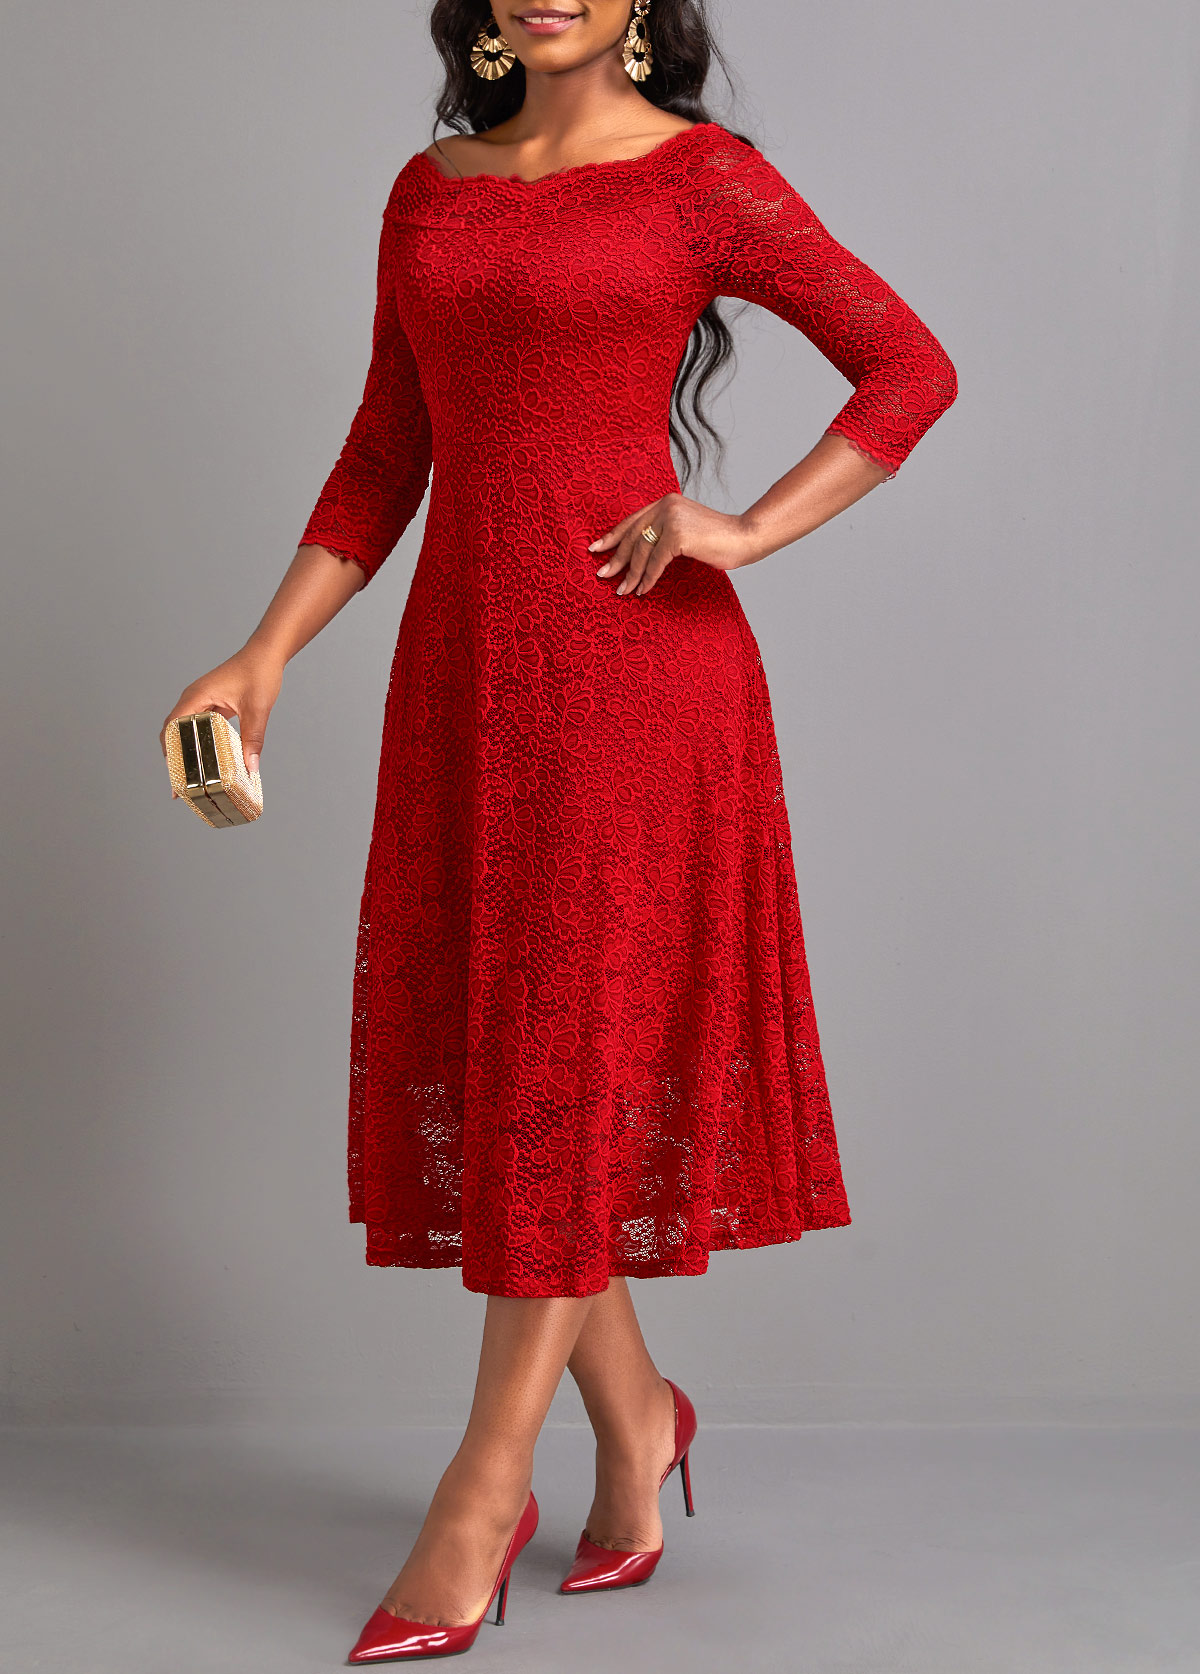 Red Lace Three Quarter Length Sleeve Dress